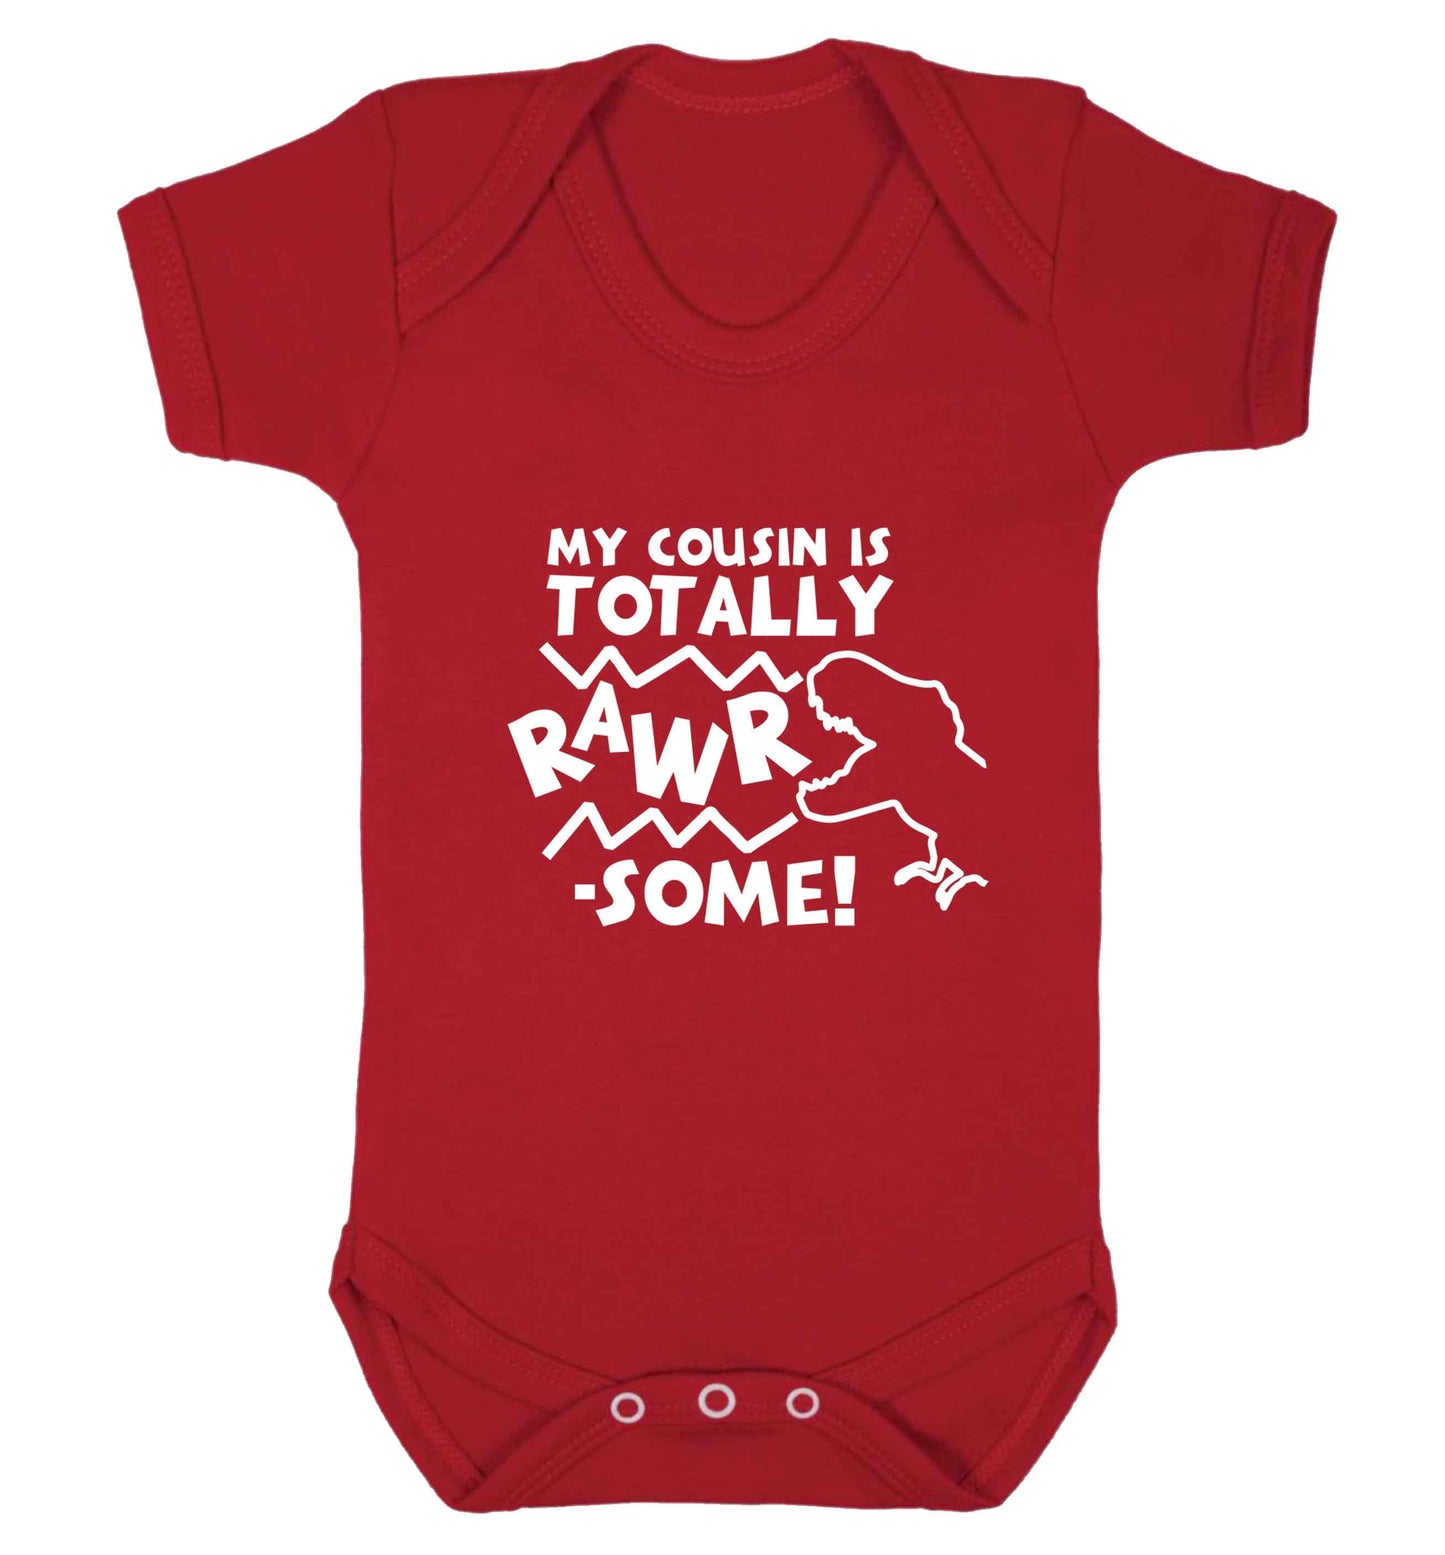 My cousin is totally rawrsome baby vest red 18-24 months